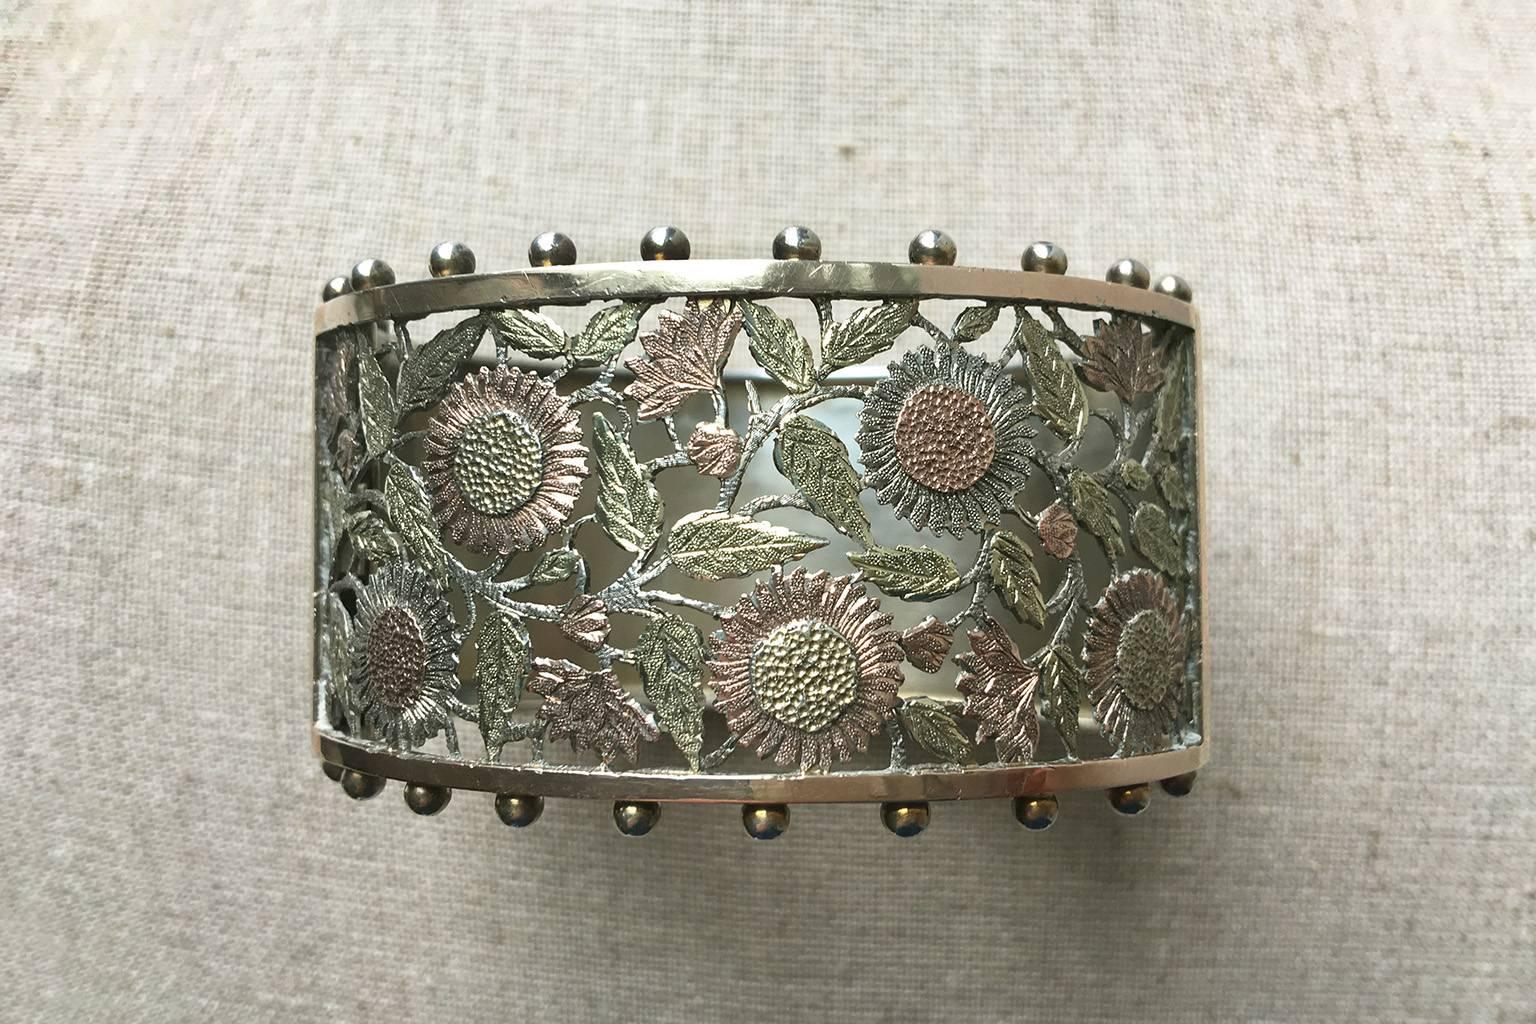 C.1883. A Victorian Aesthetic movement tri-color sterling silver bangle. The front panel of this wide bangle shows skillfully pierced flowers and leaves, and they are adorned with rose and green gold. With sterling silver, it makes a beautiful